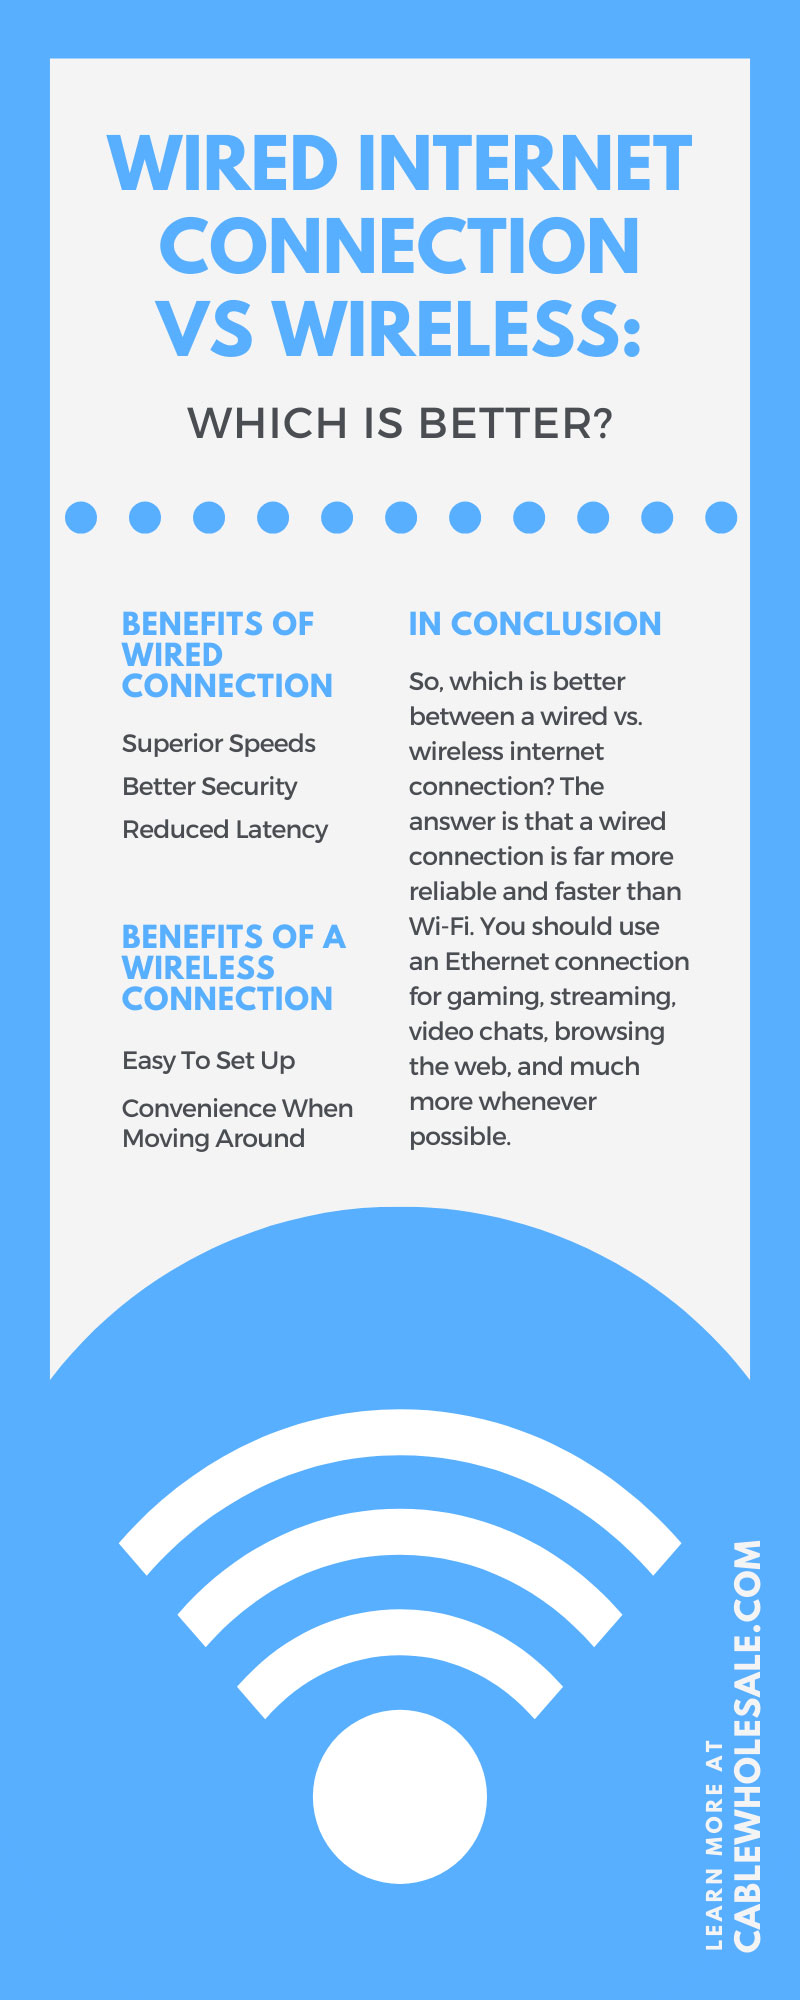 Wired Internet Connection vs. Wireless: Which Is Better?